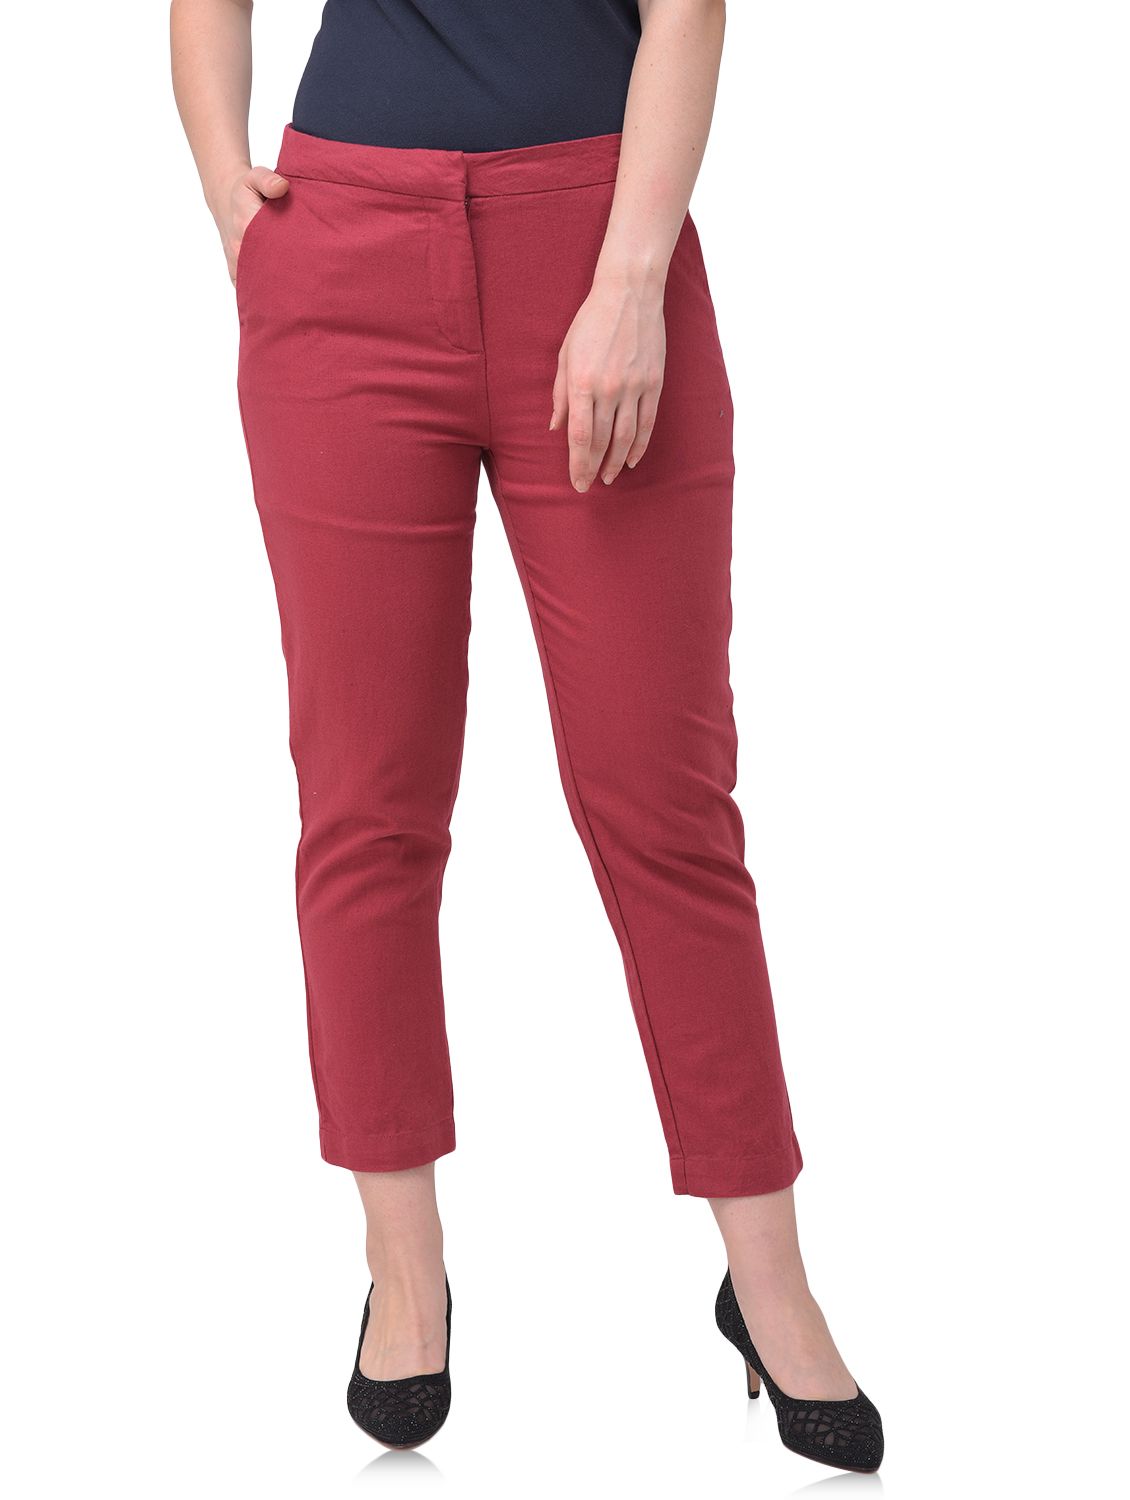 Beet red trousers for women